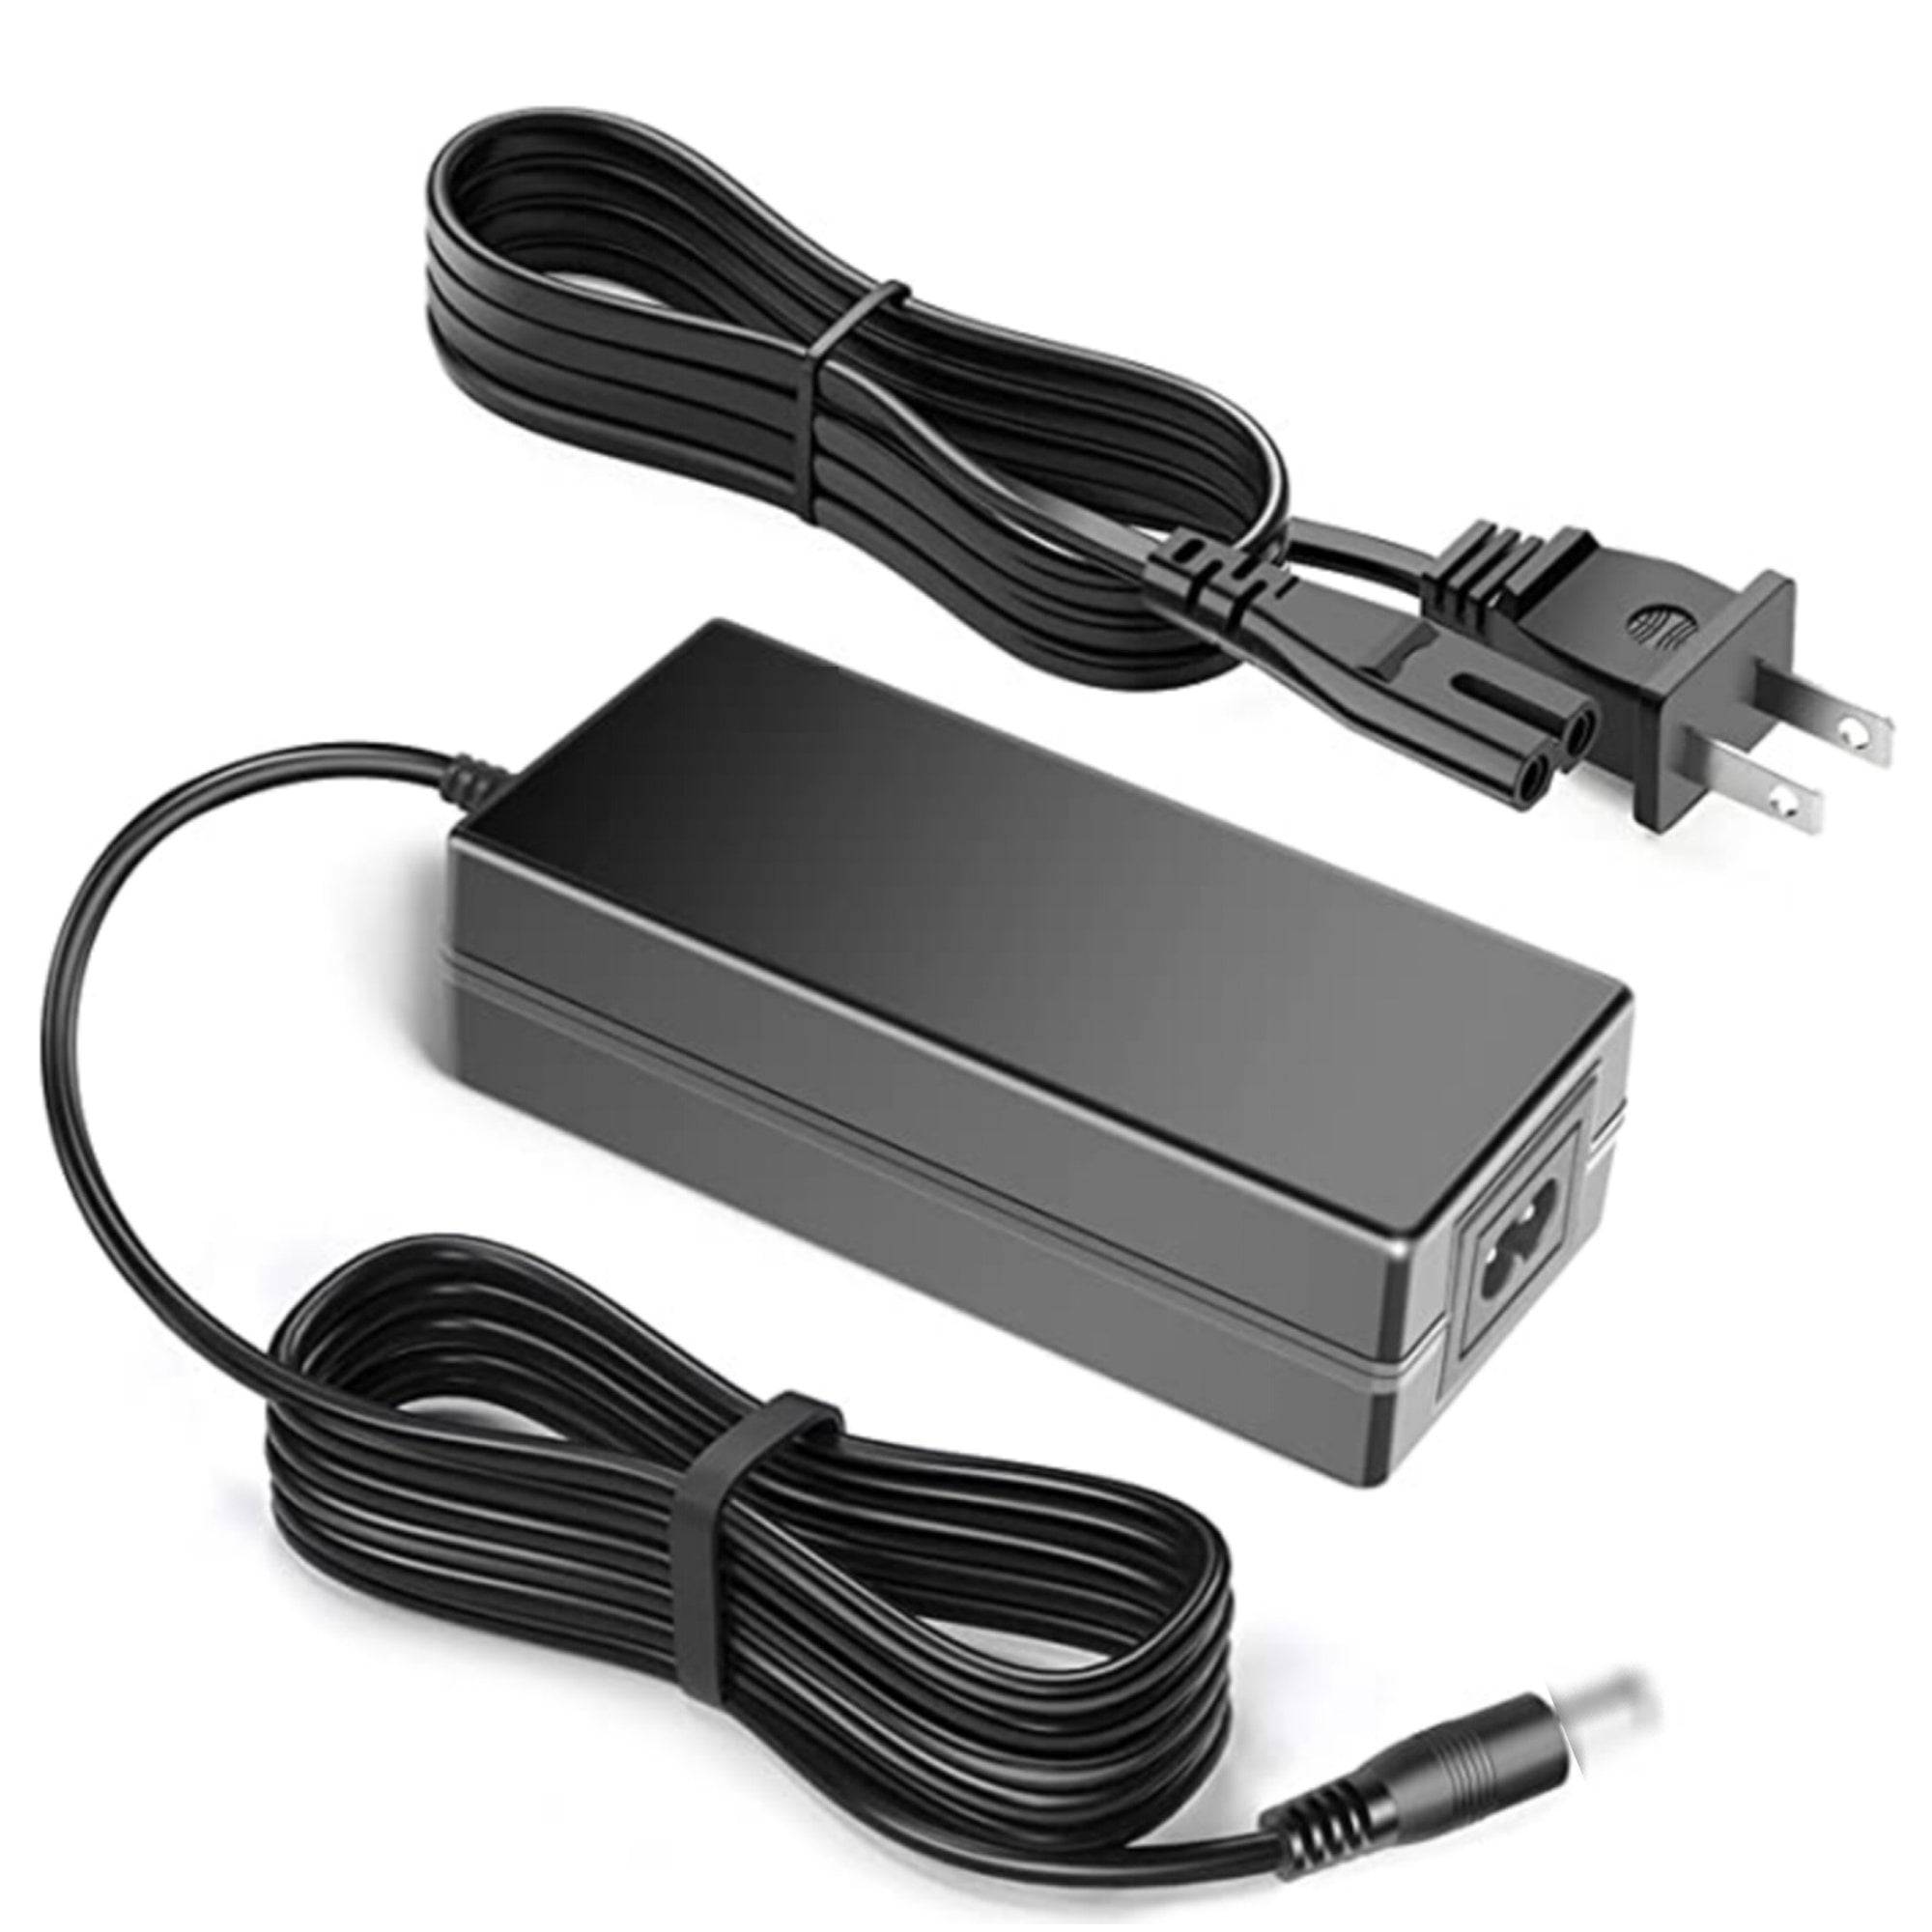 AC/DC Adapter Charger for Lenovo IdeaPad 520 520S 520-15IKB 520S-14IKB 520S-14 Laptop Power Supply - Walmart.com